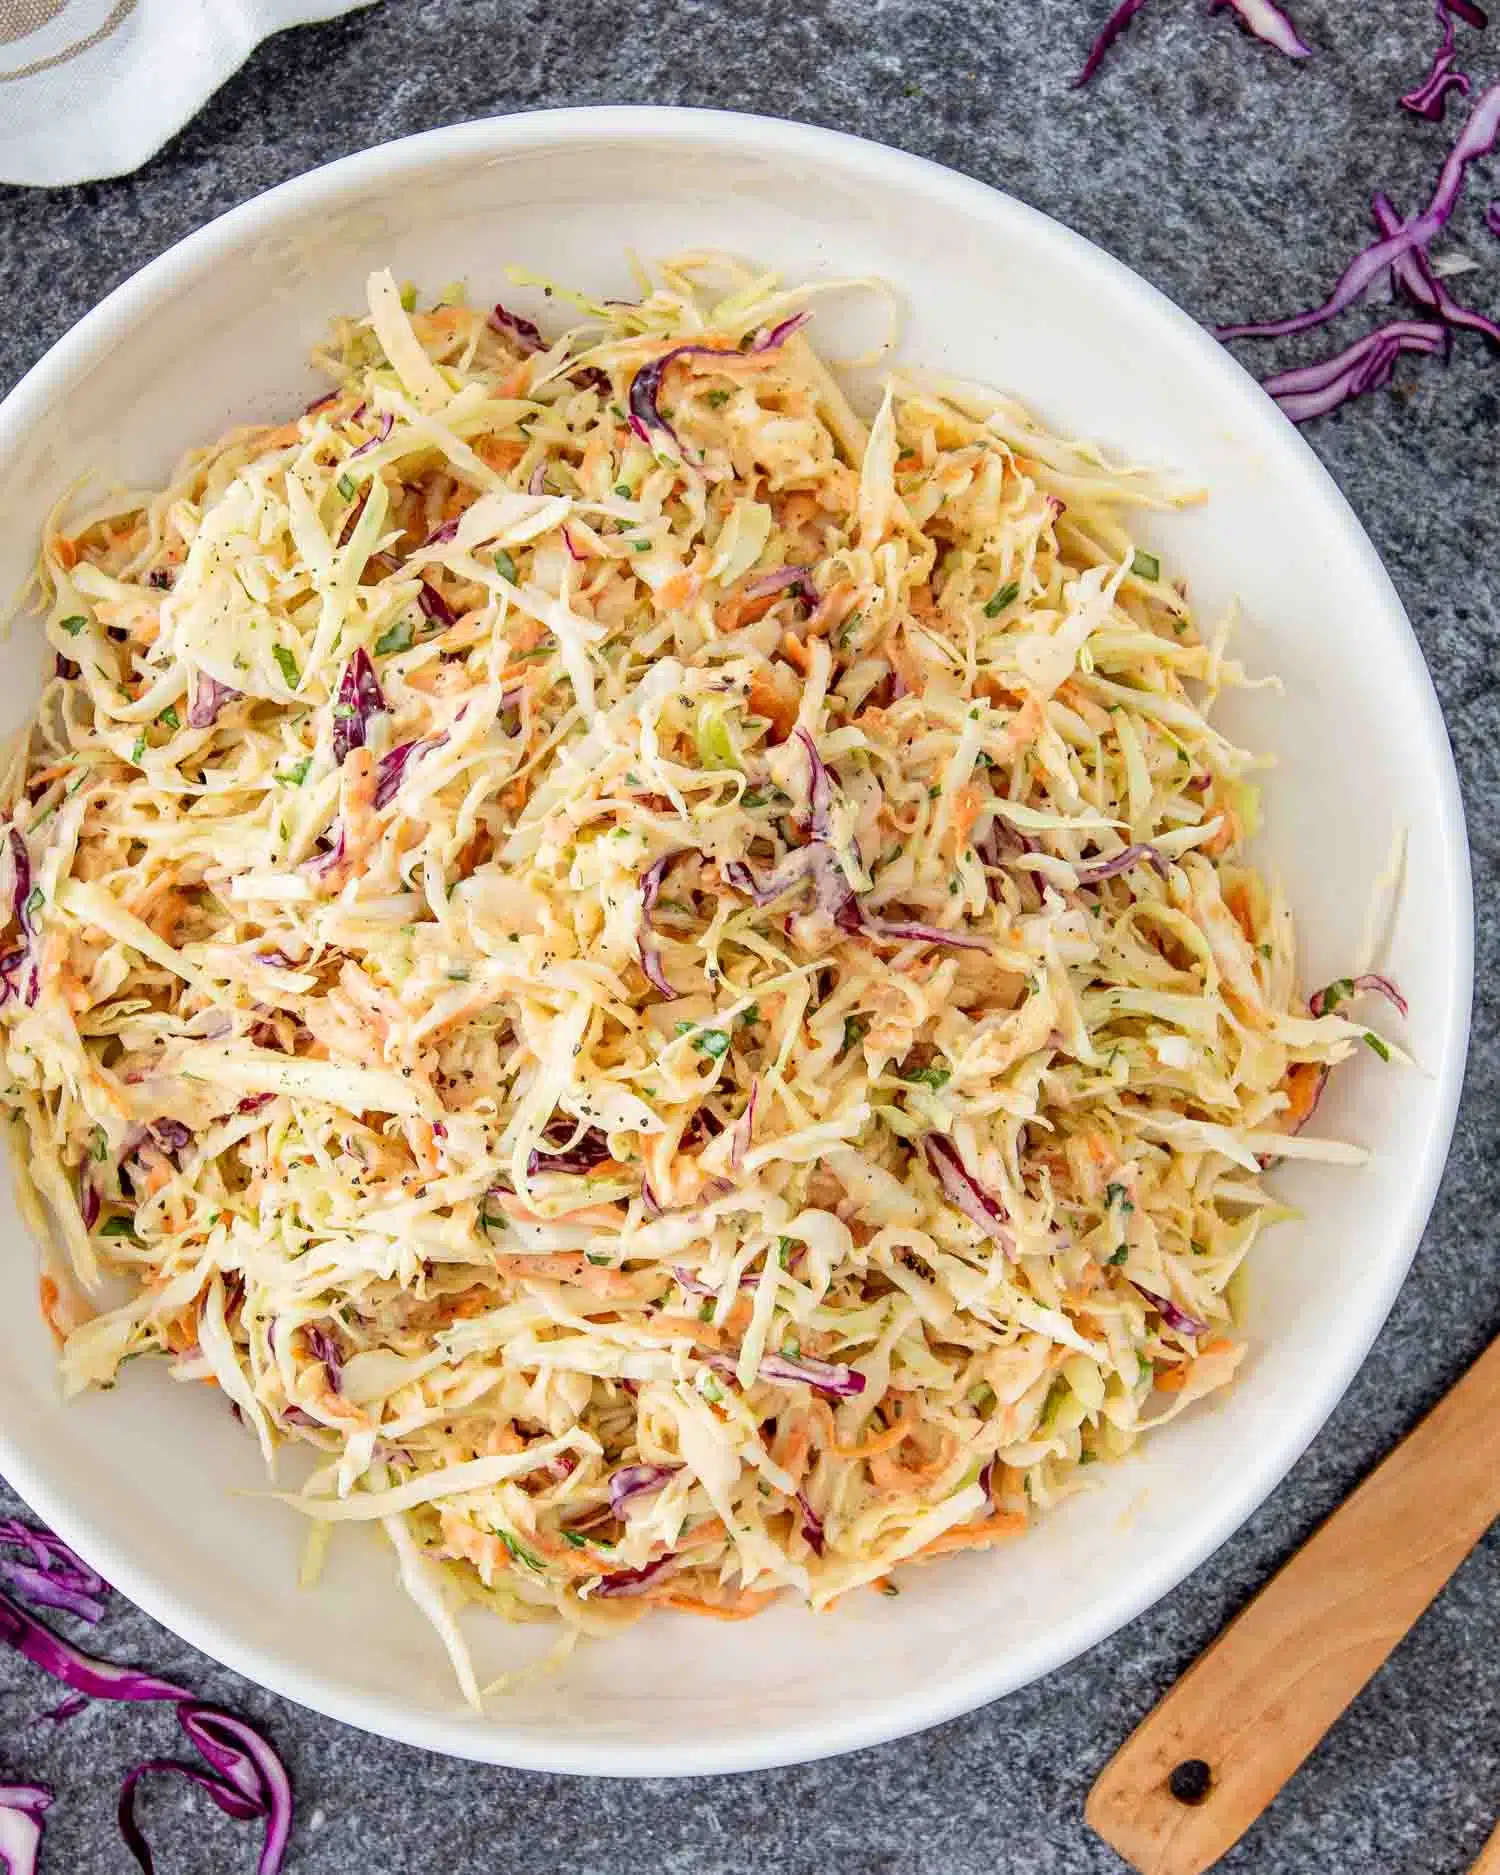 freshly made coleslaw in a white bowl.